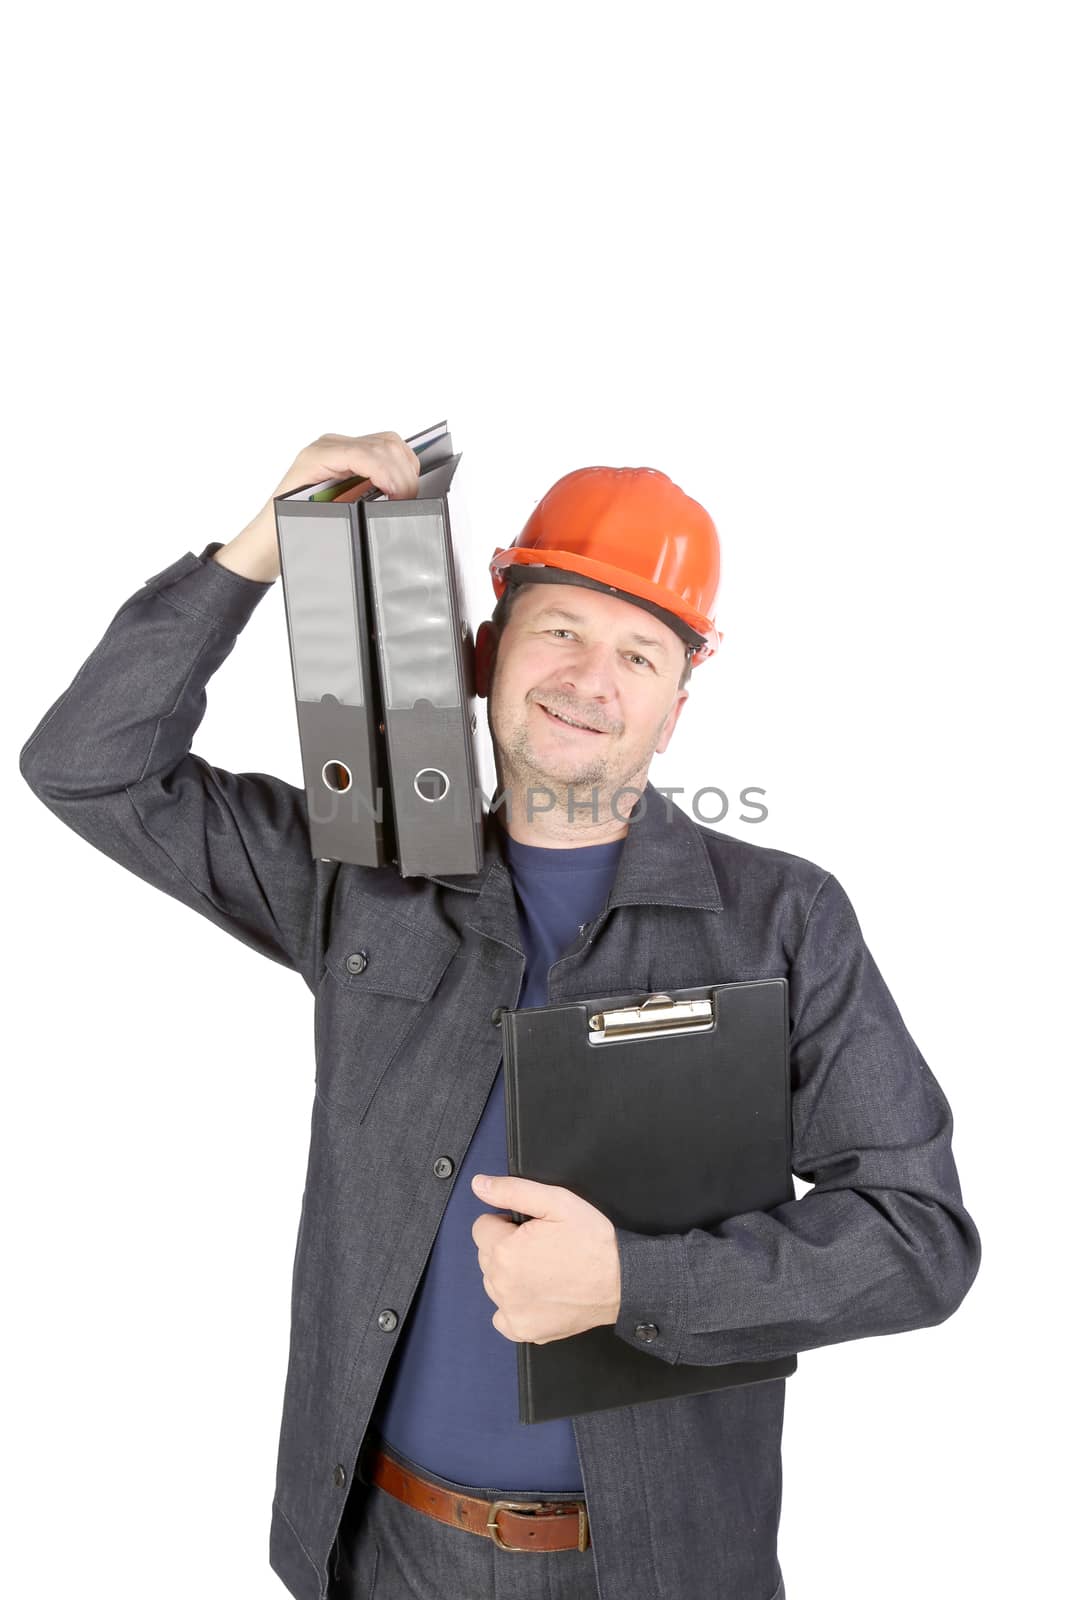 Man in hard hat holding folders. Isolated on a white background.